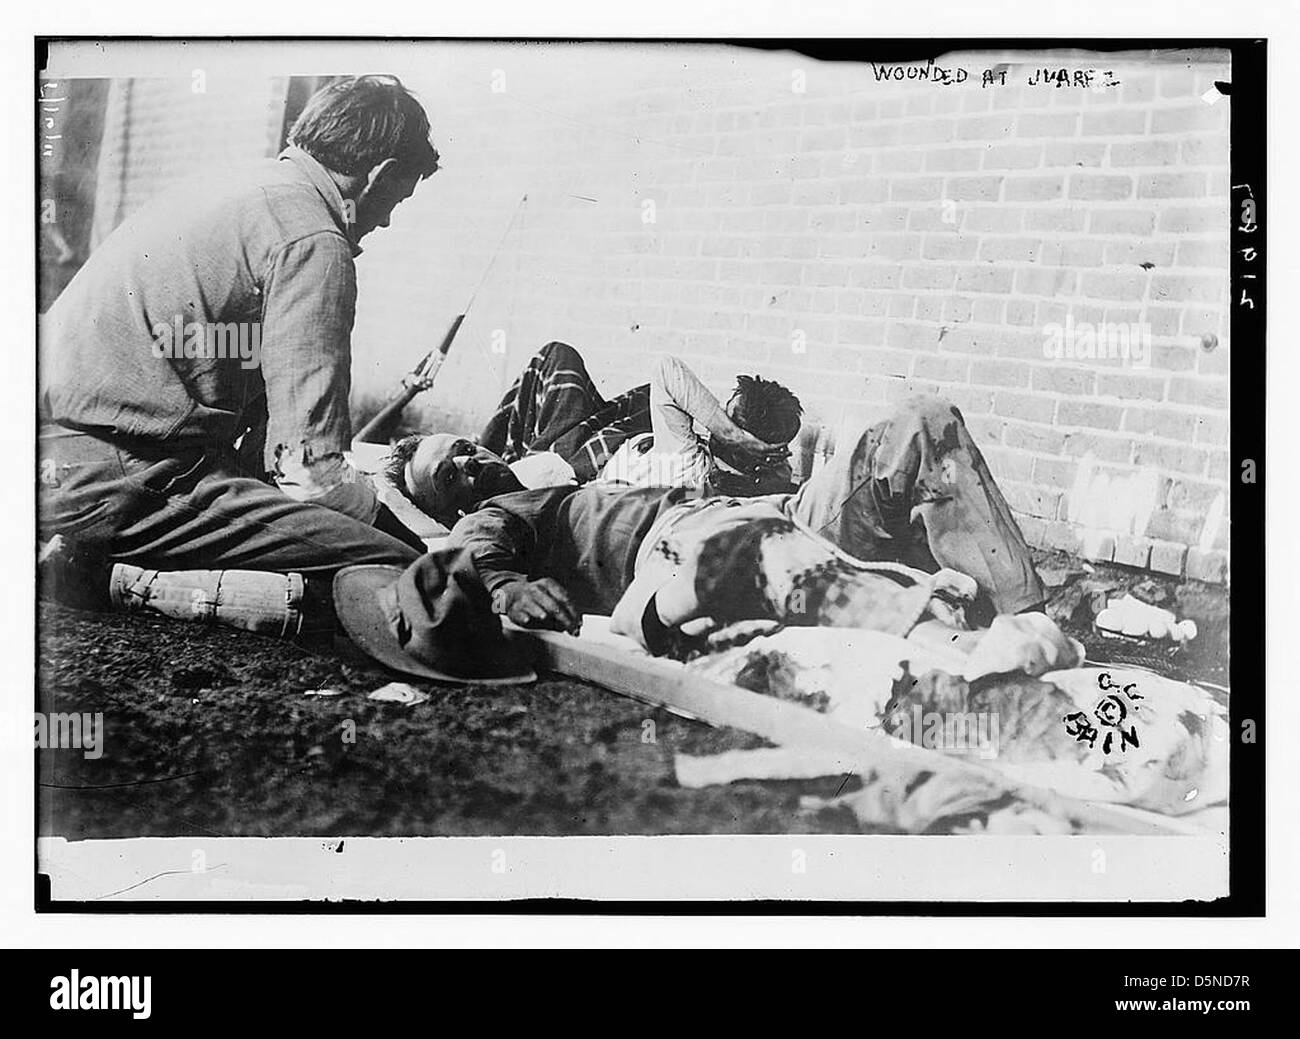 Wounded at Juarez (LOC) Stock Photo